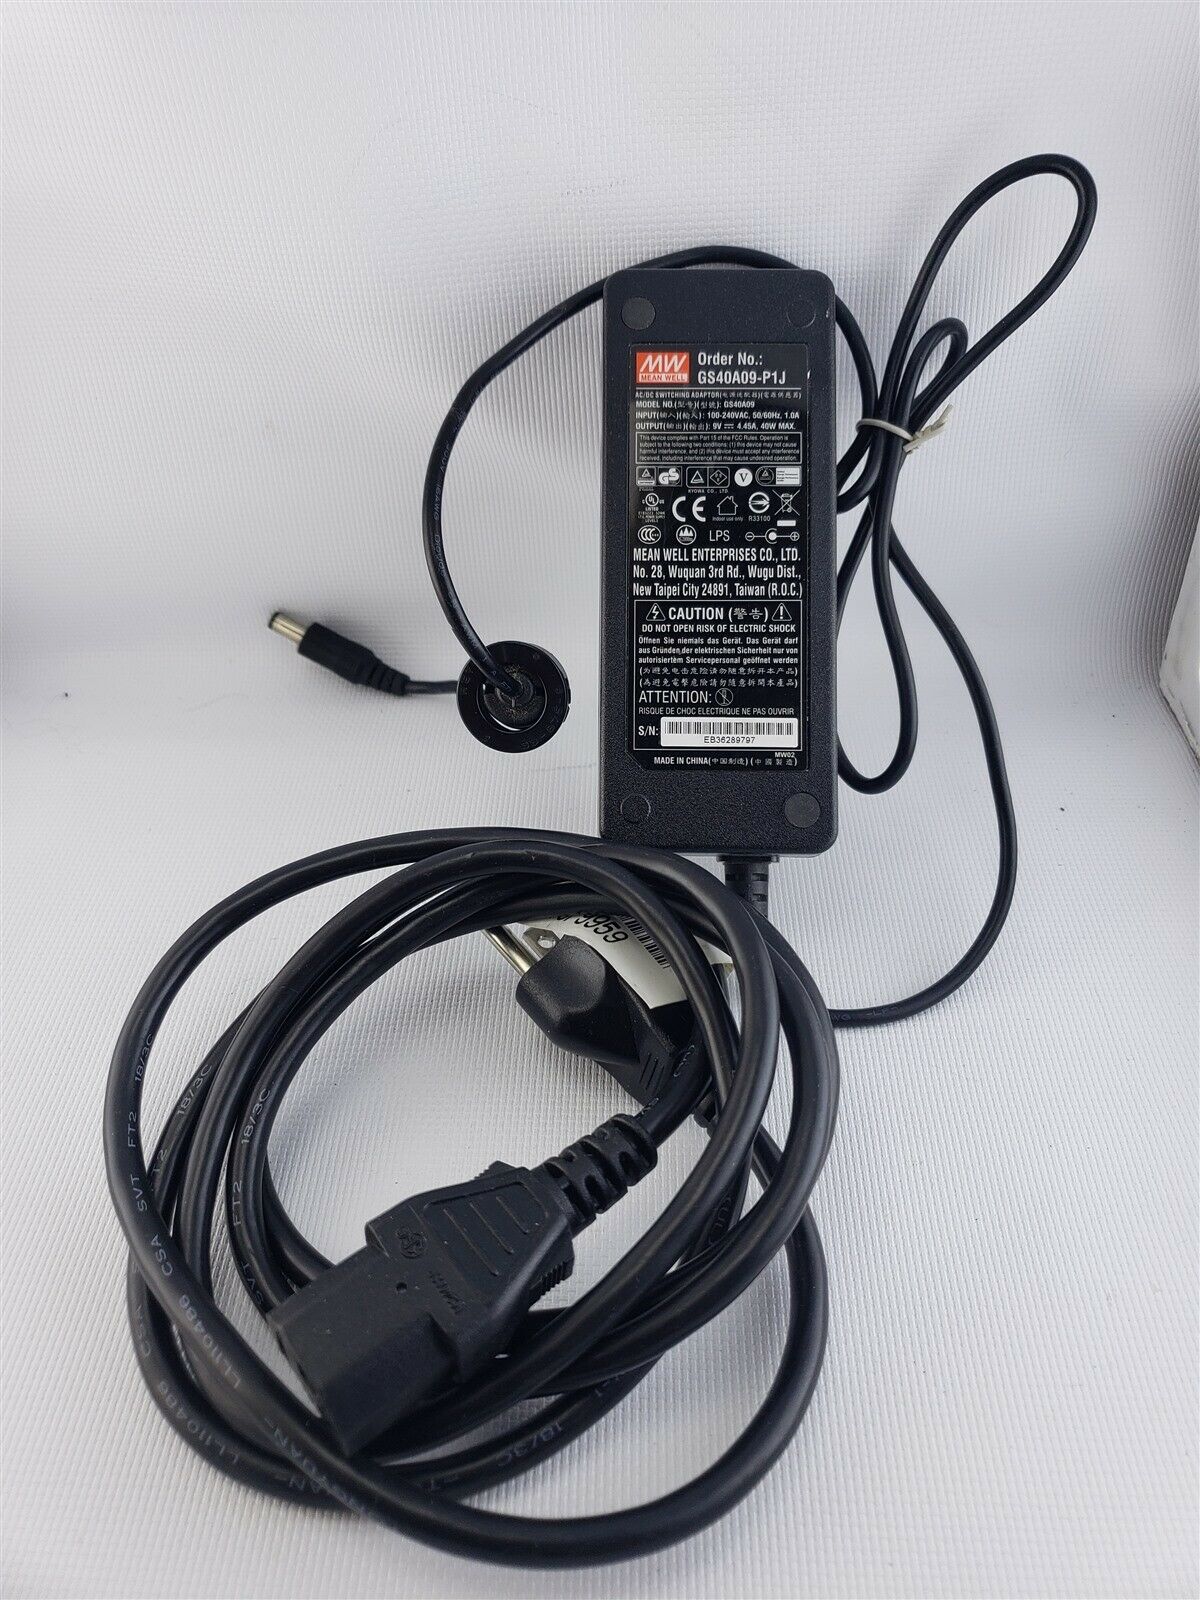 New Original OEM 12V 4A AC Adapter&Cord for MSI Optix MAG27C LED Gaming Monitor@ Country/Region of Manufacture: China - Click Image to Close